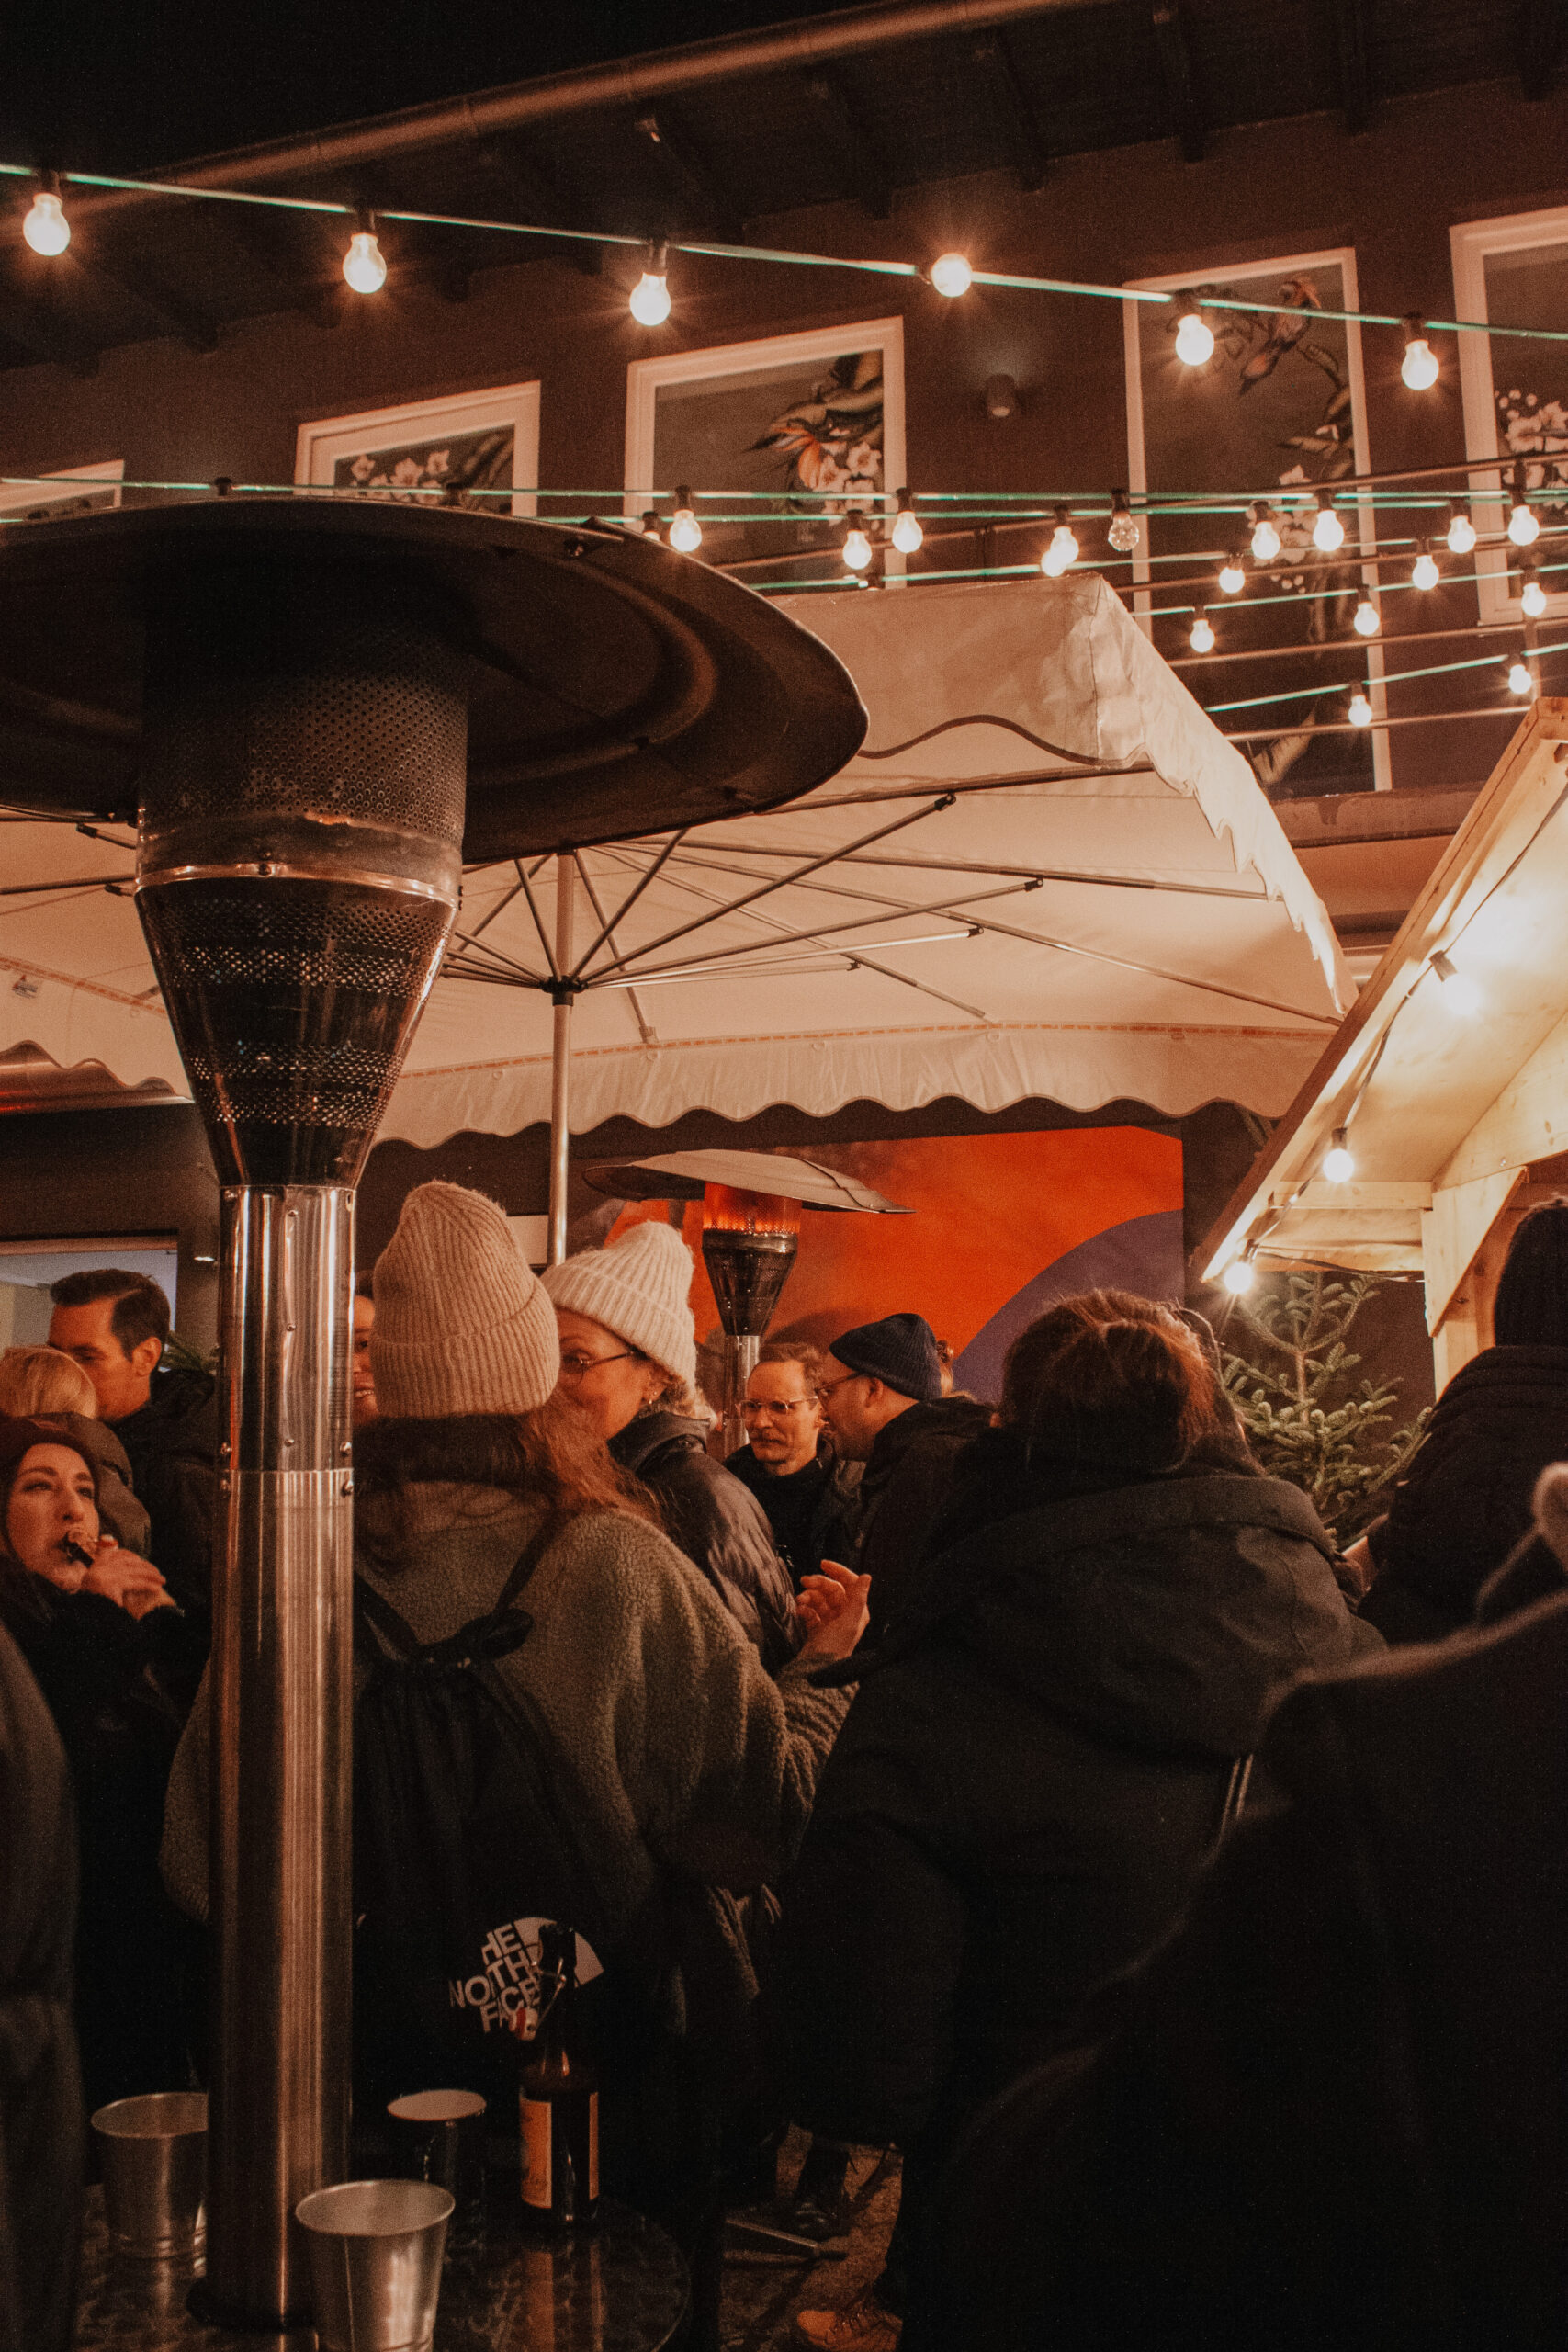 Dfrost, Christmas, Feuerzangenbowle, Dfrost hosts, event, retail identity, agency life